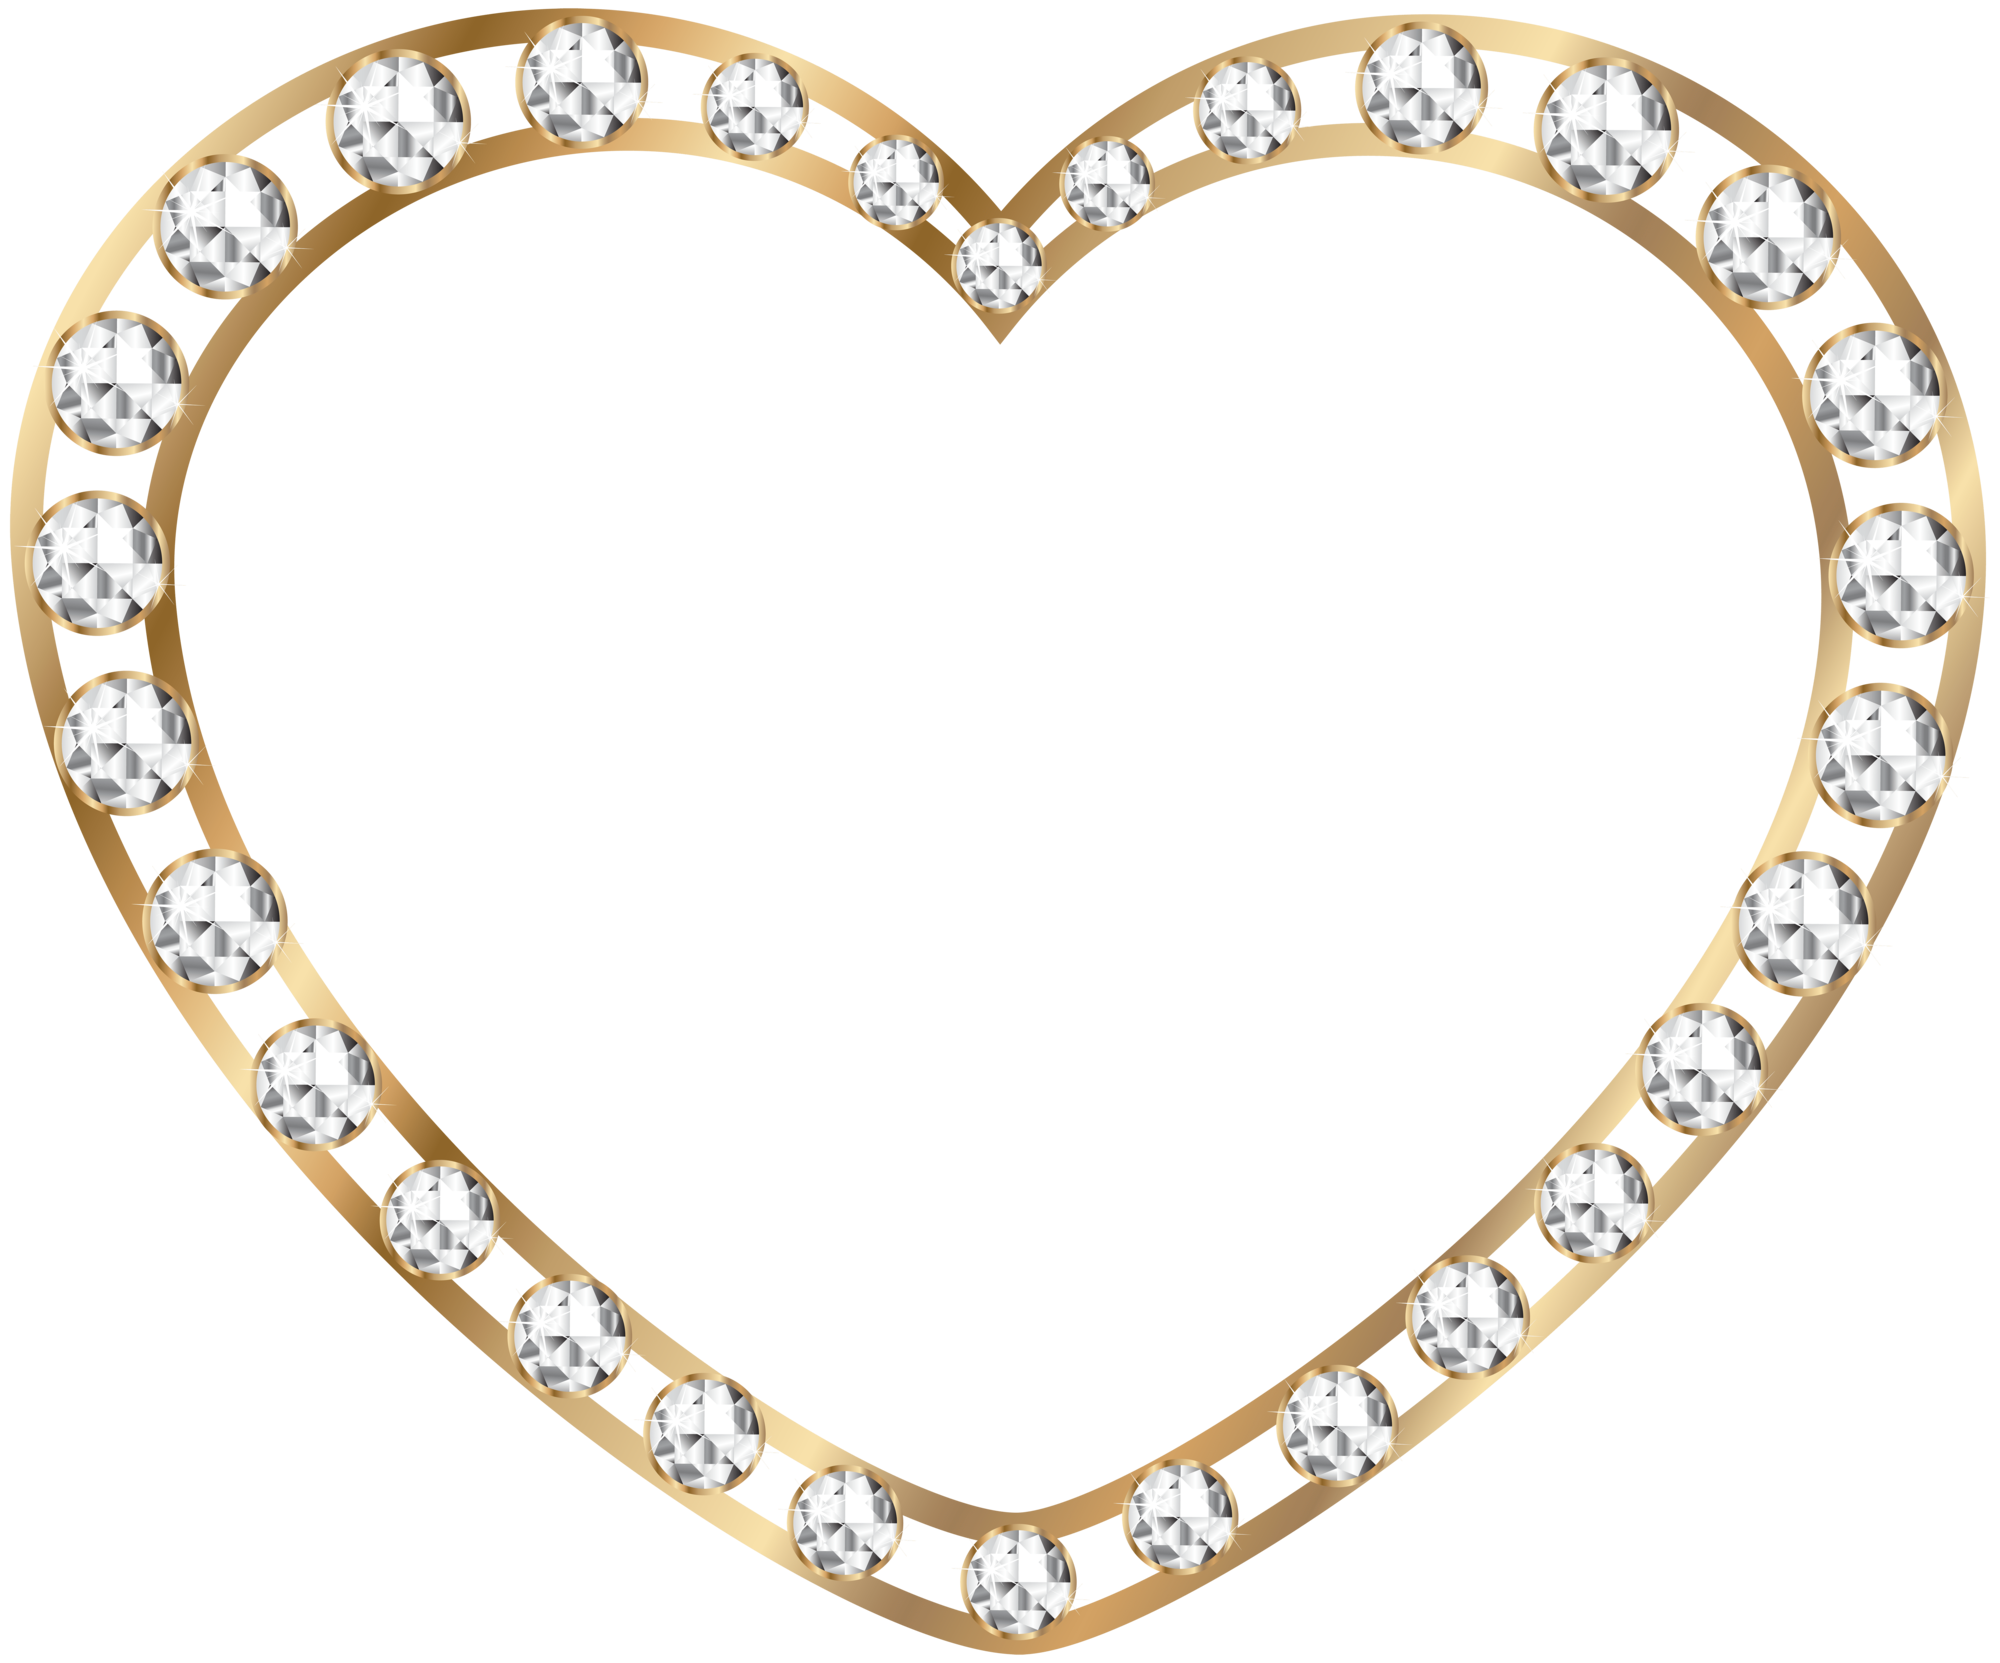 Heart Pic Gold Free Transparent Image HQ PNG Image